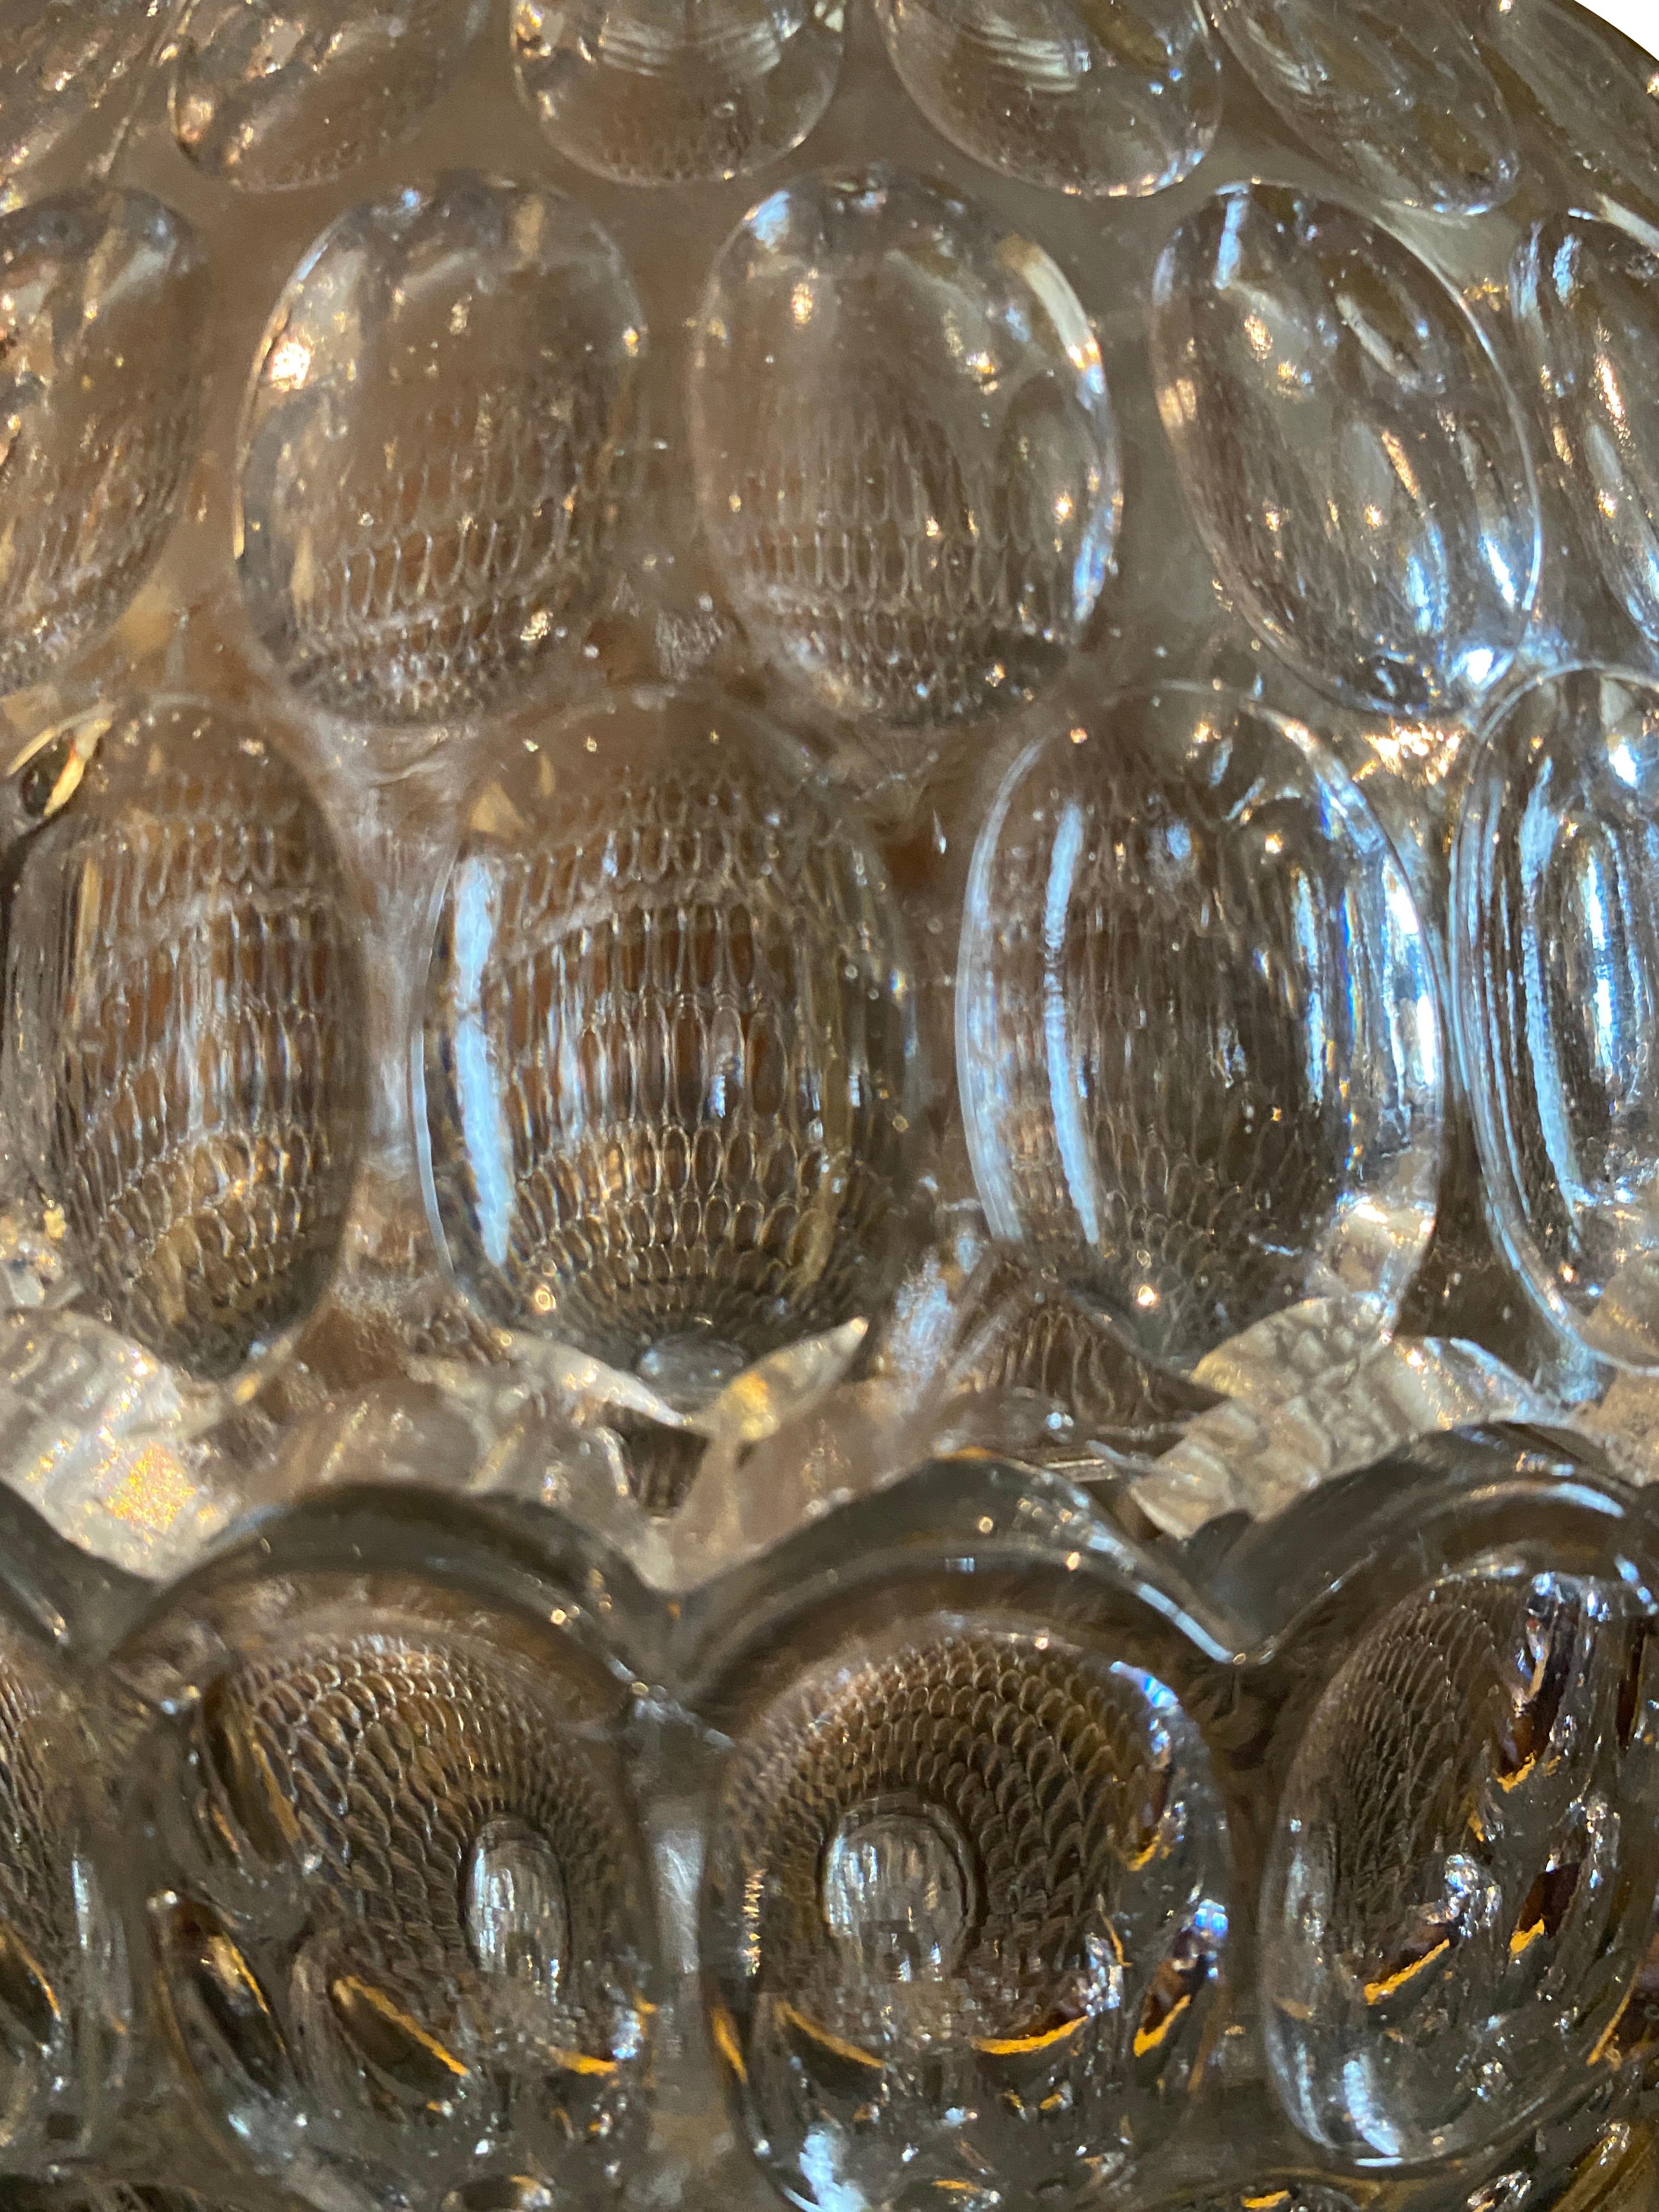 American Classical Argus or Thumbprint Glass Compote by Bakewell & Pears & Company